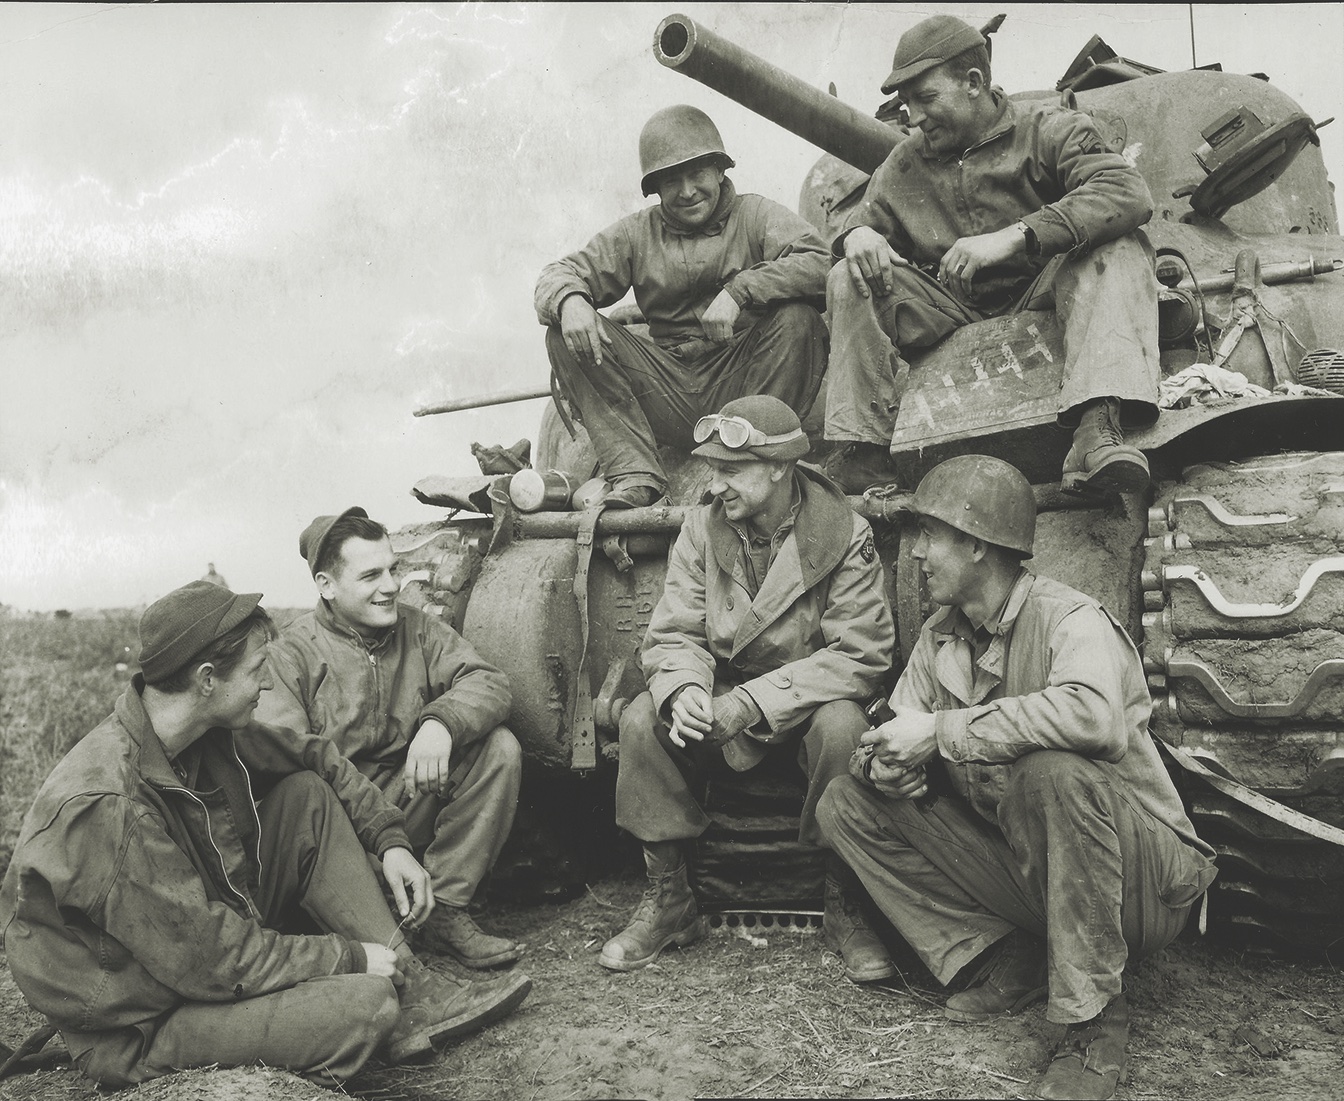 Pyle with a crew from the U.S. Army’s 191st Tank Battalion on the Anzio beachhead in 1944. (U.S. Army Center of Military History)